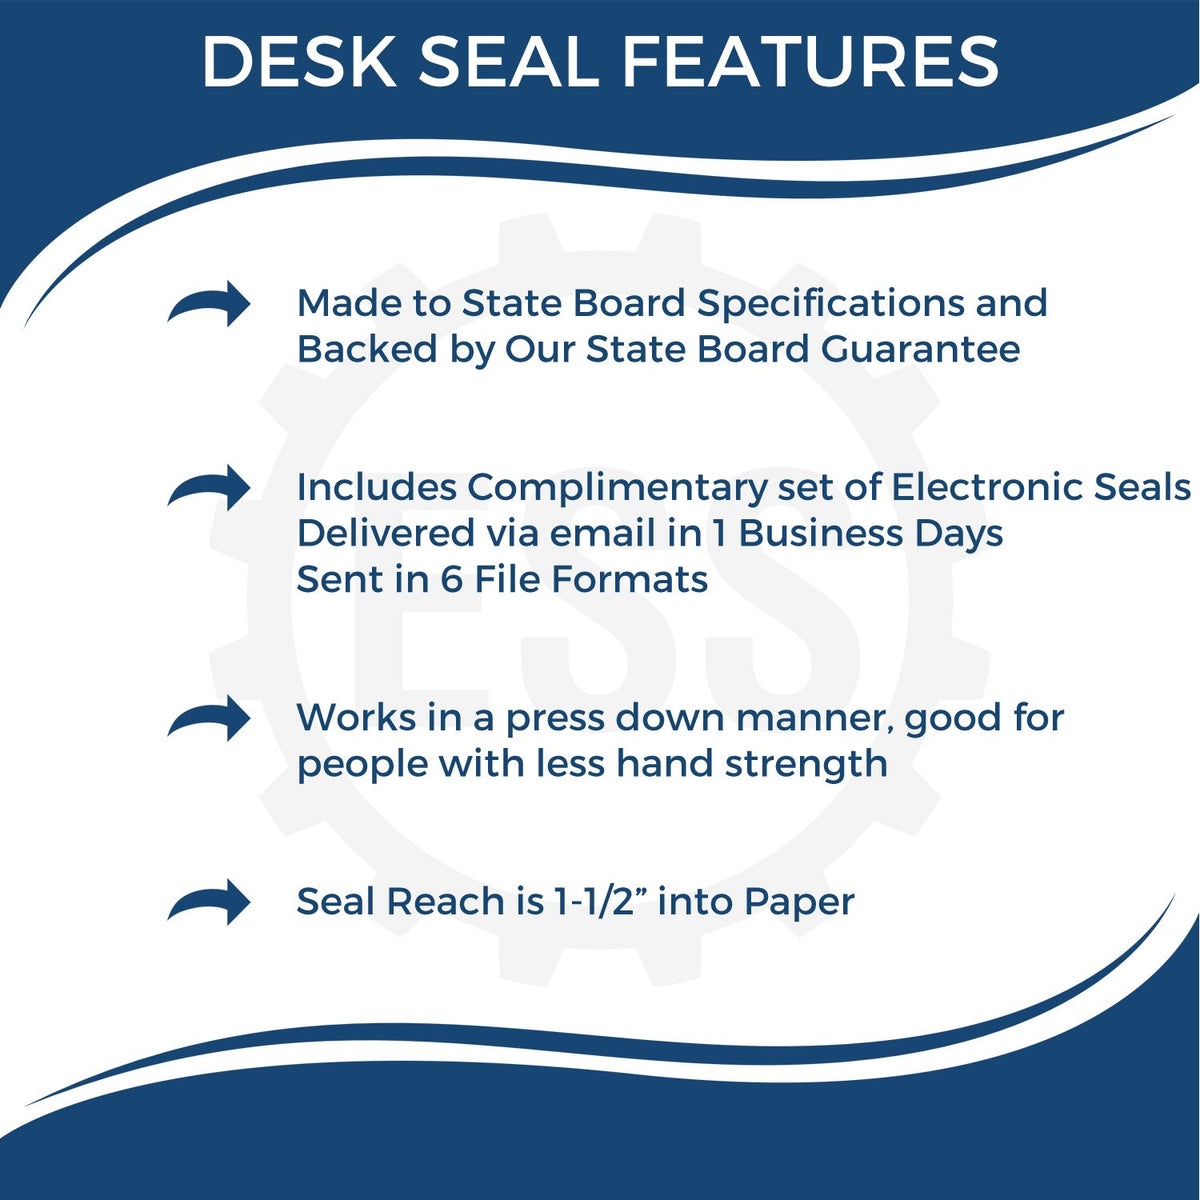 A picture of an infographic highlighting the selling points for the South Dakota Engineer Desk Seal